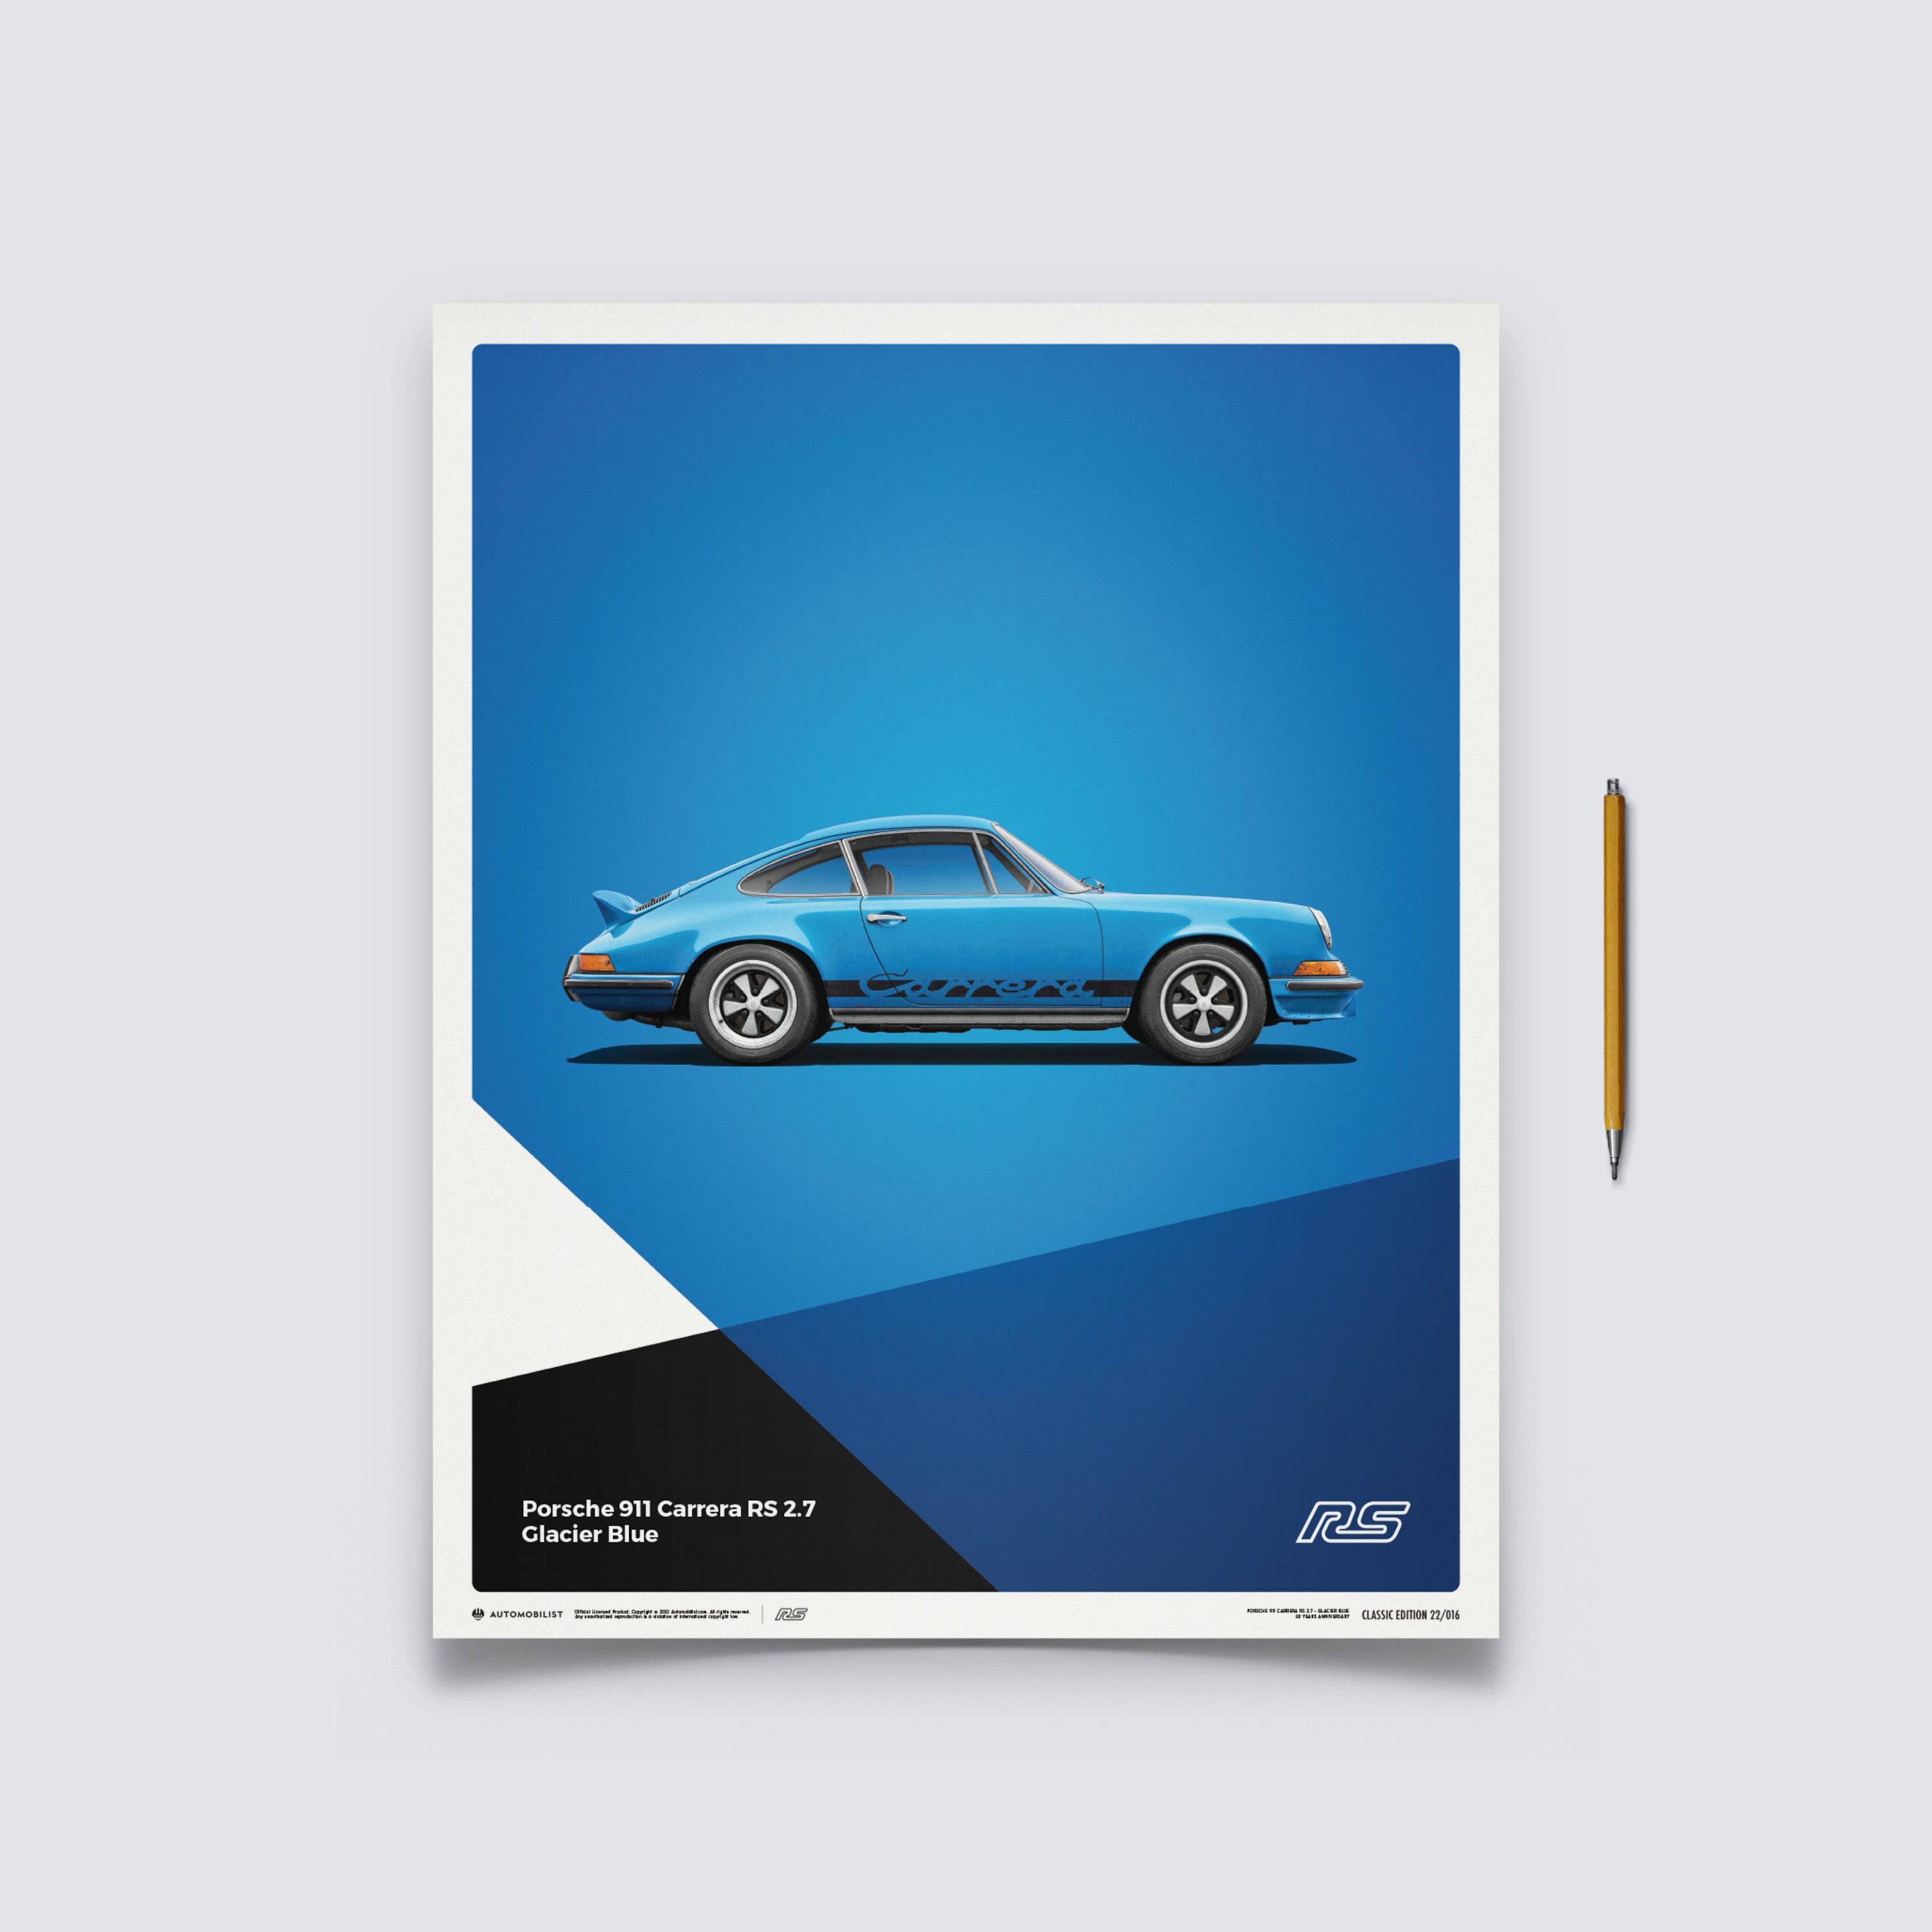 Limited Edition Car: Over 917 Royalty-Free Licensable Stock Illustrations &  Drawings